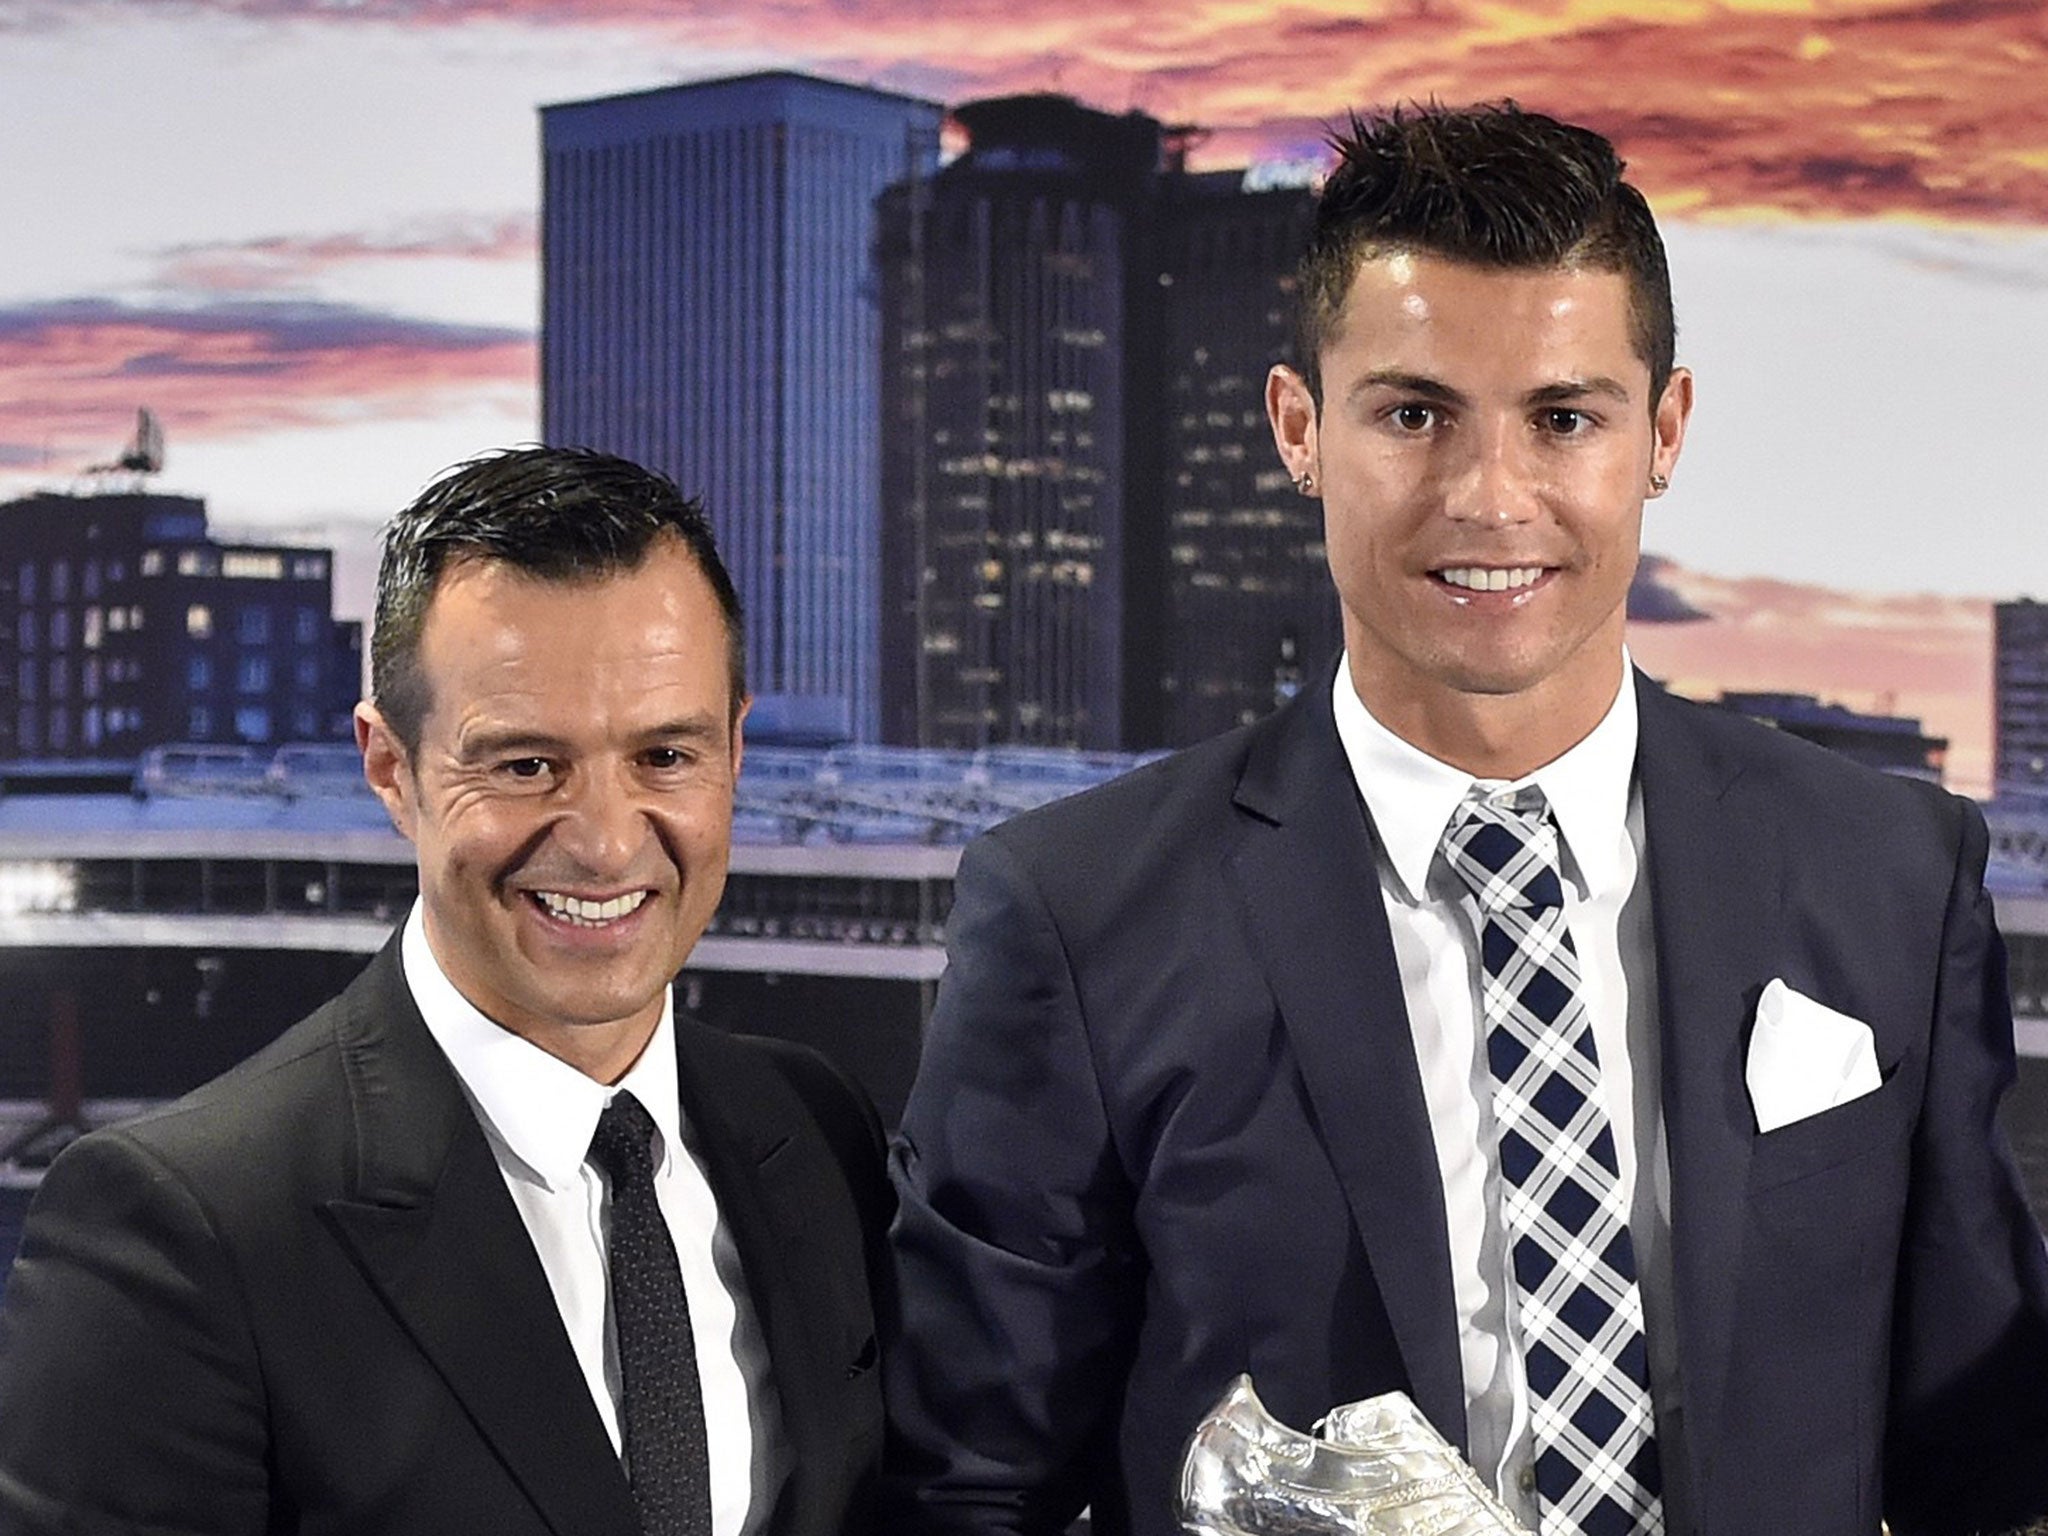 &#13;
Jorge Mendes with his client Cristiano Ronaldo (Getty)&#13;